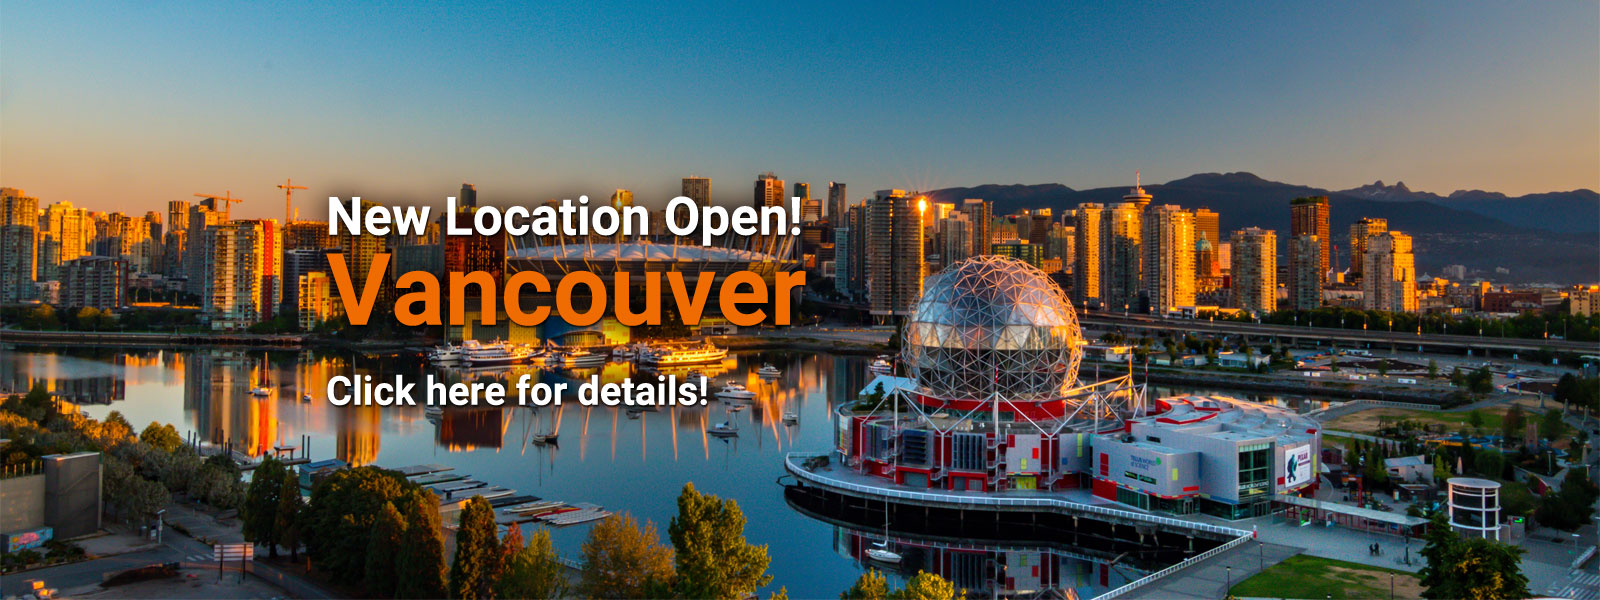 New Location Open! Vancouver